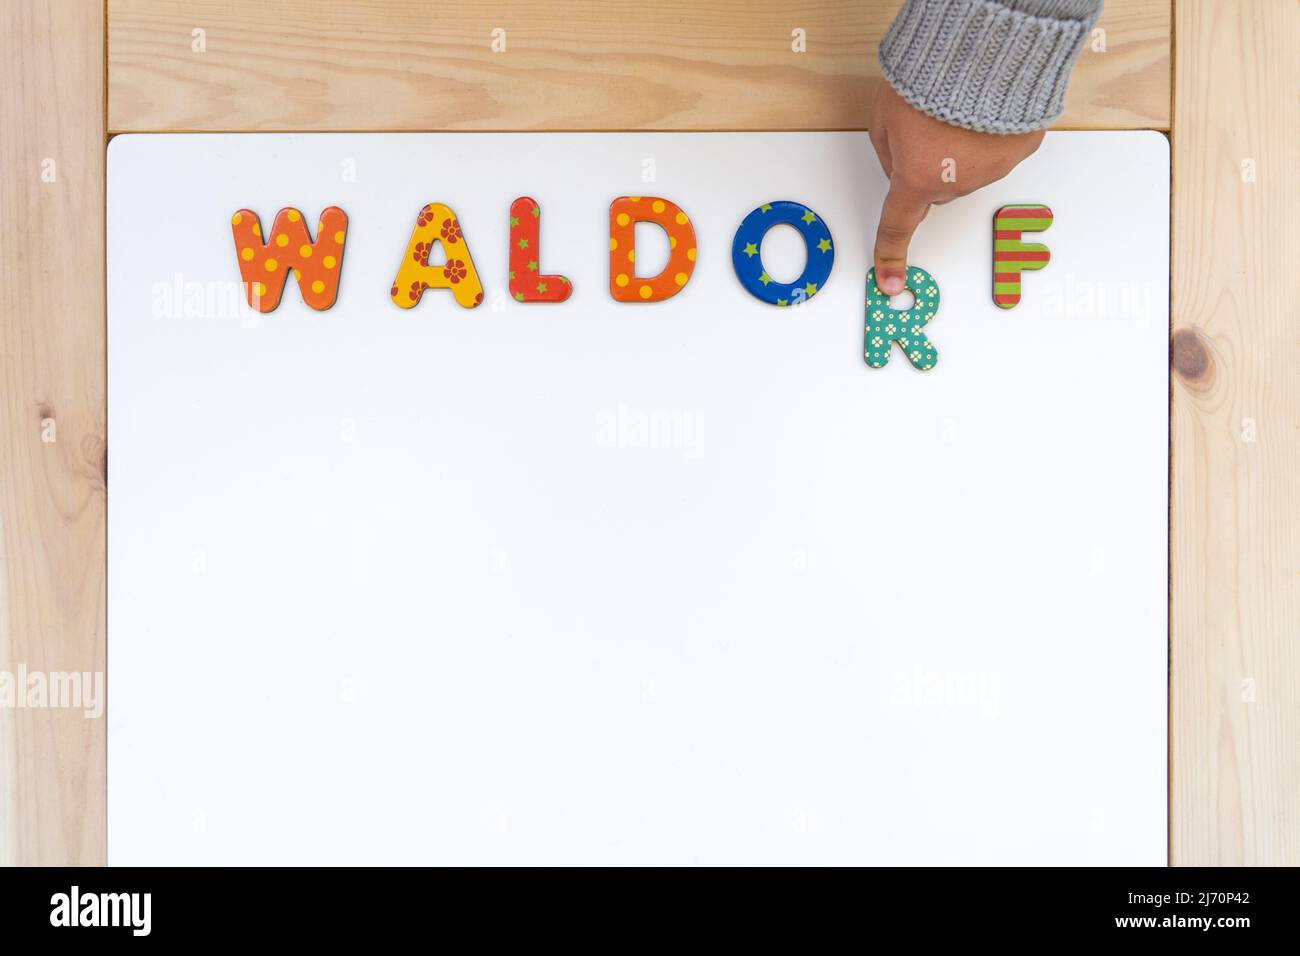 Waldorf pedagogy text. The Waldorf methodology is based on free instruction by students, and their autonomy to gradually acquire the knowledge Stock Photo